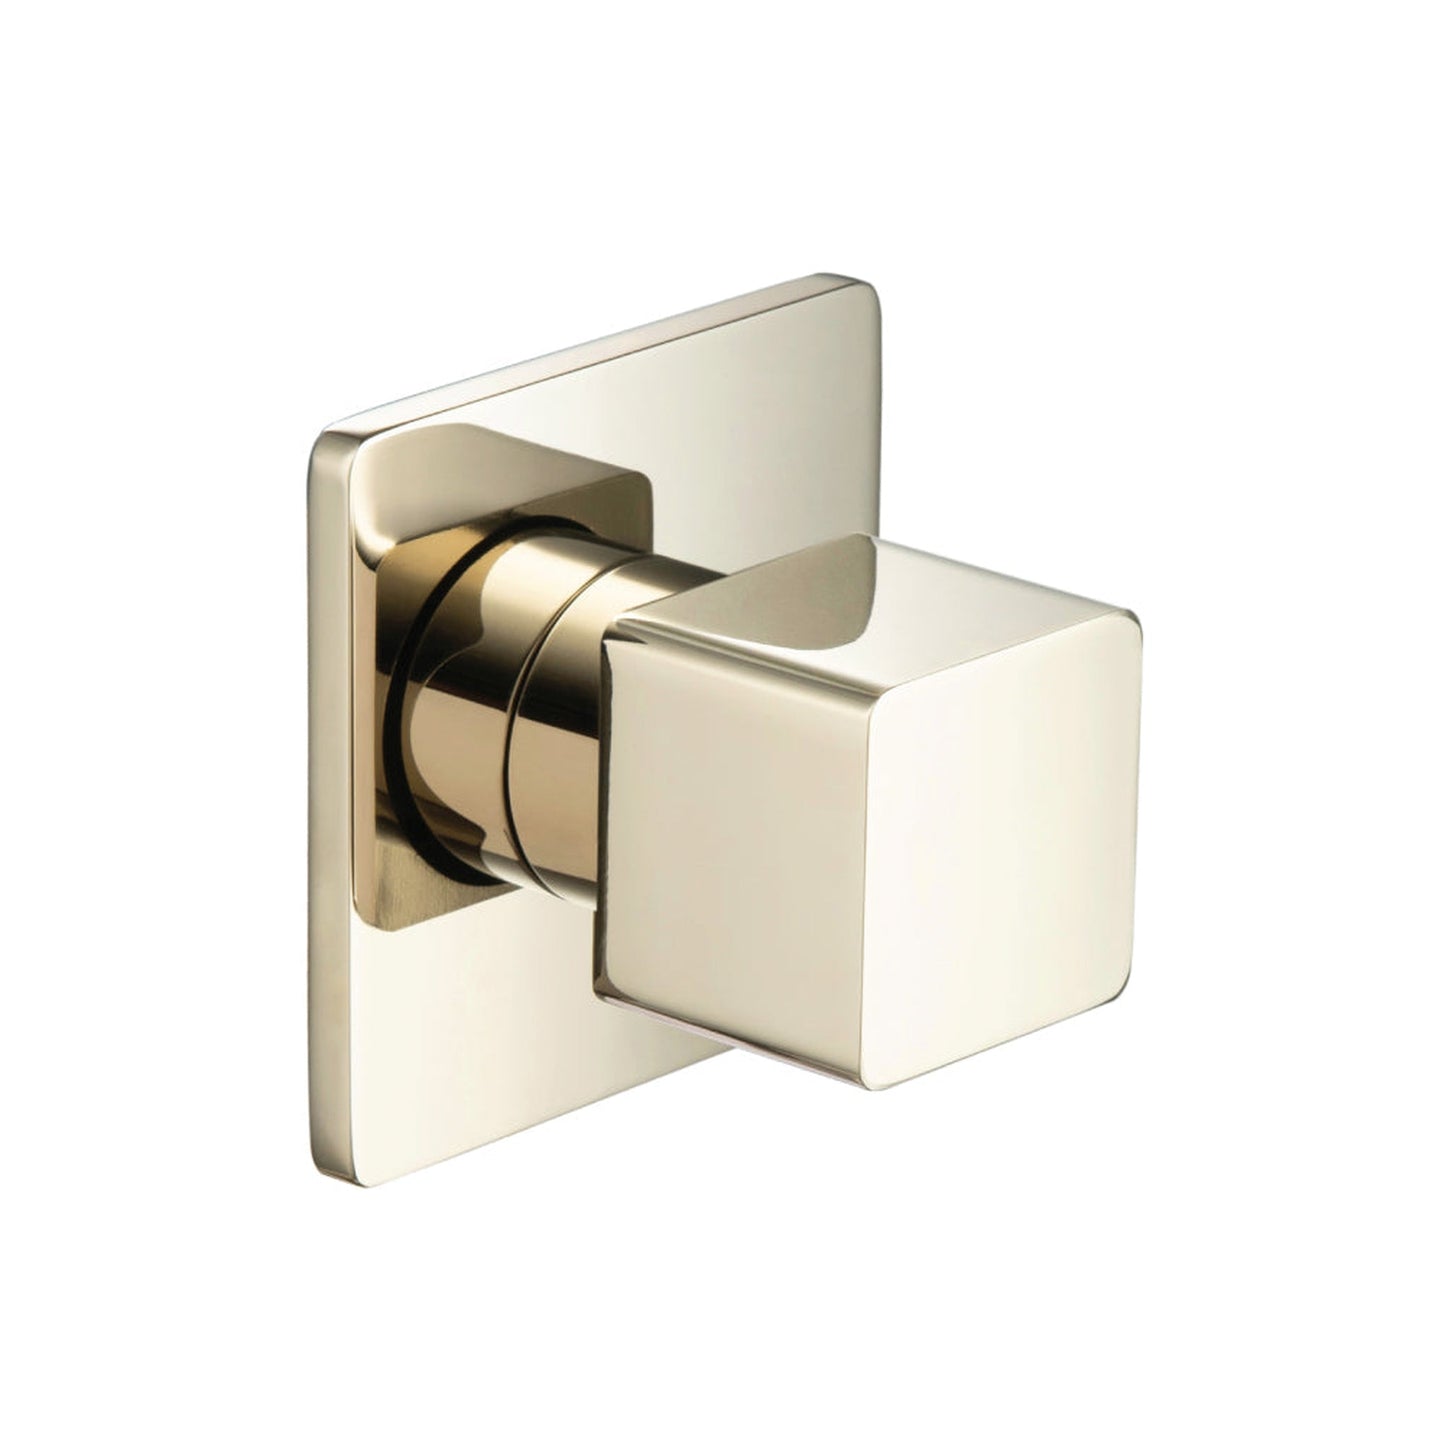 Isenberg Serie 196 3" Polished Nickel PVD Wall Mounted Shower Faucet Trim With 0.75" Single-Output NPT Female Connection Volume Control Valve